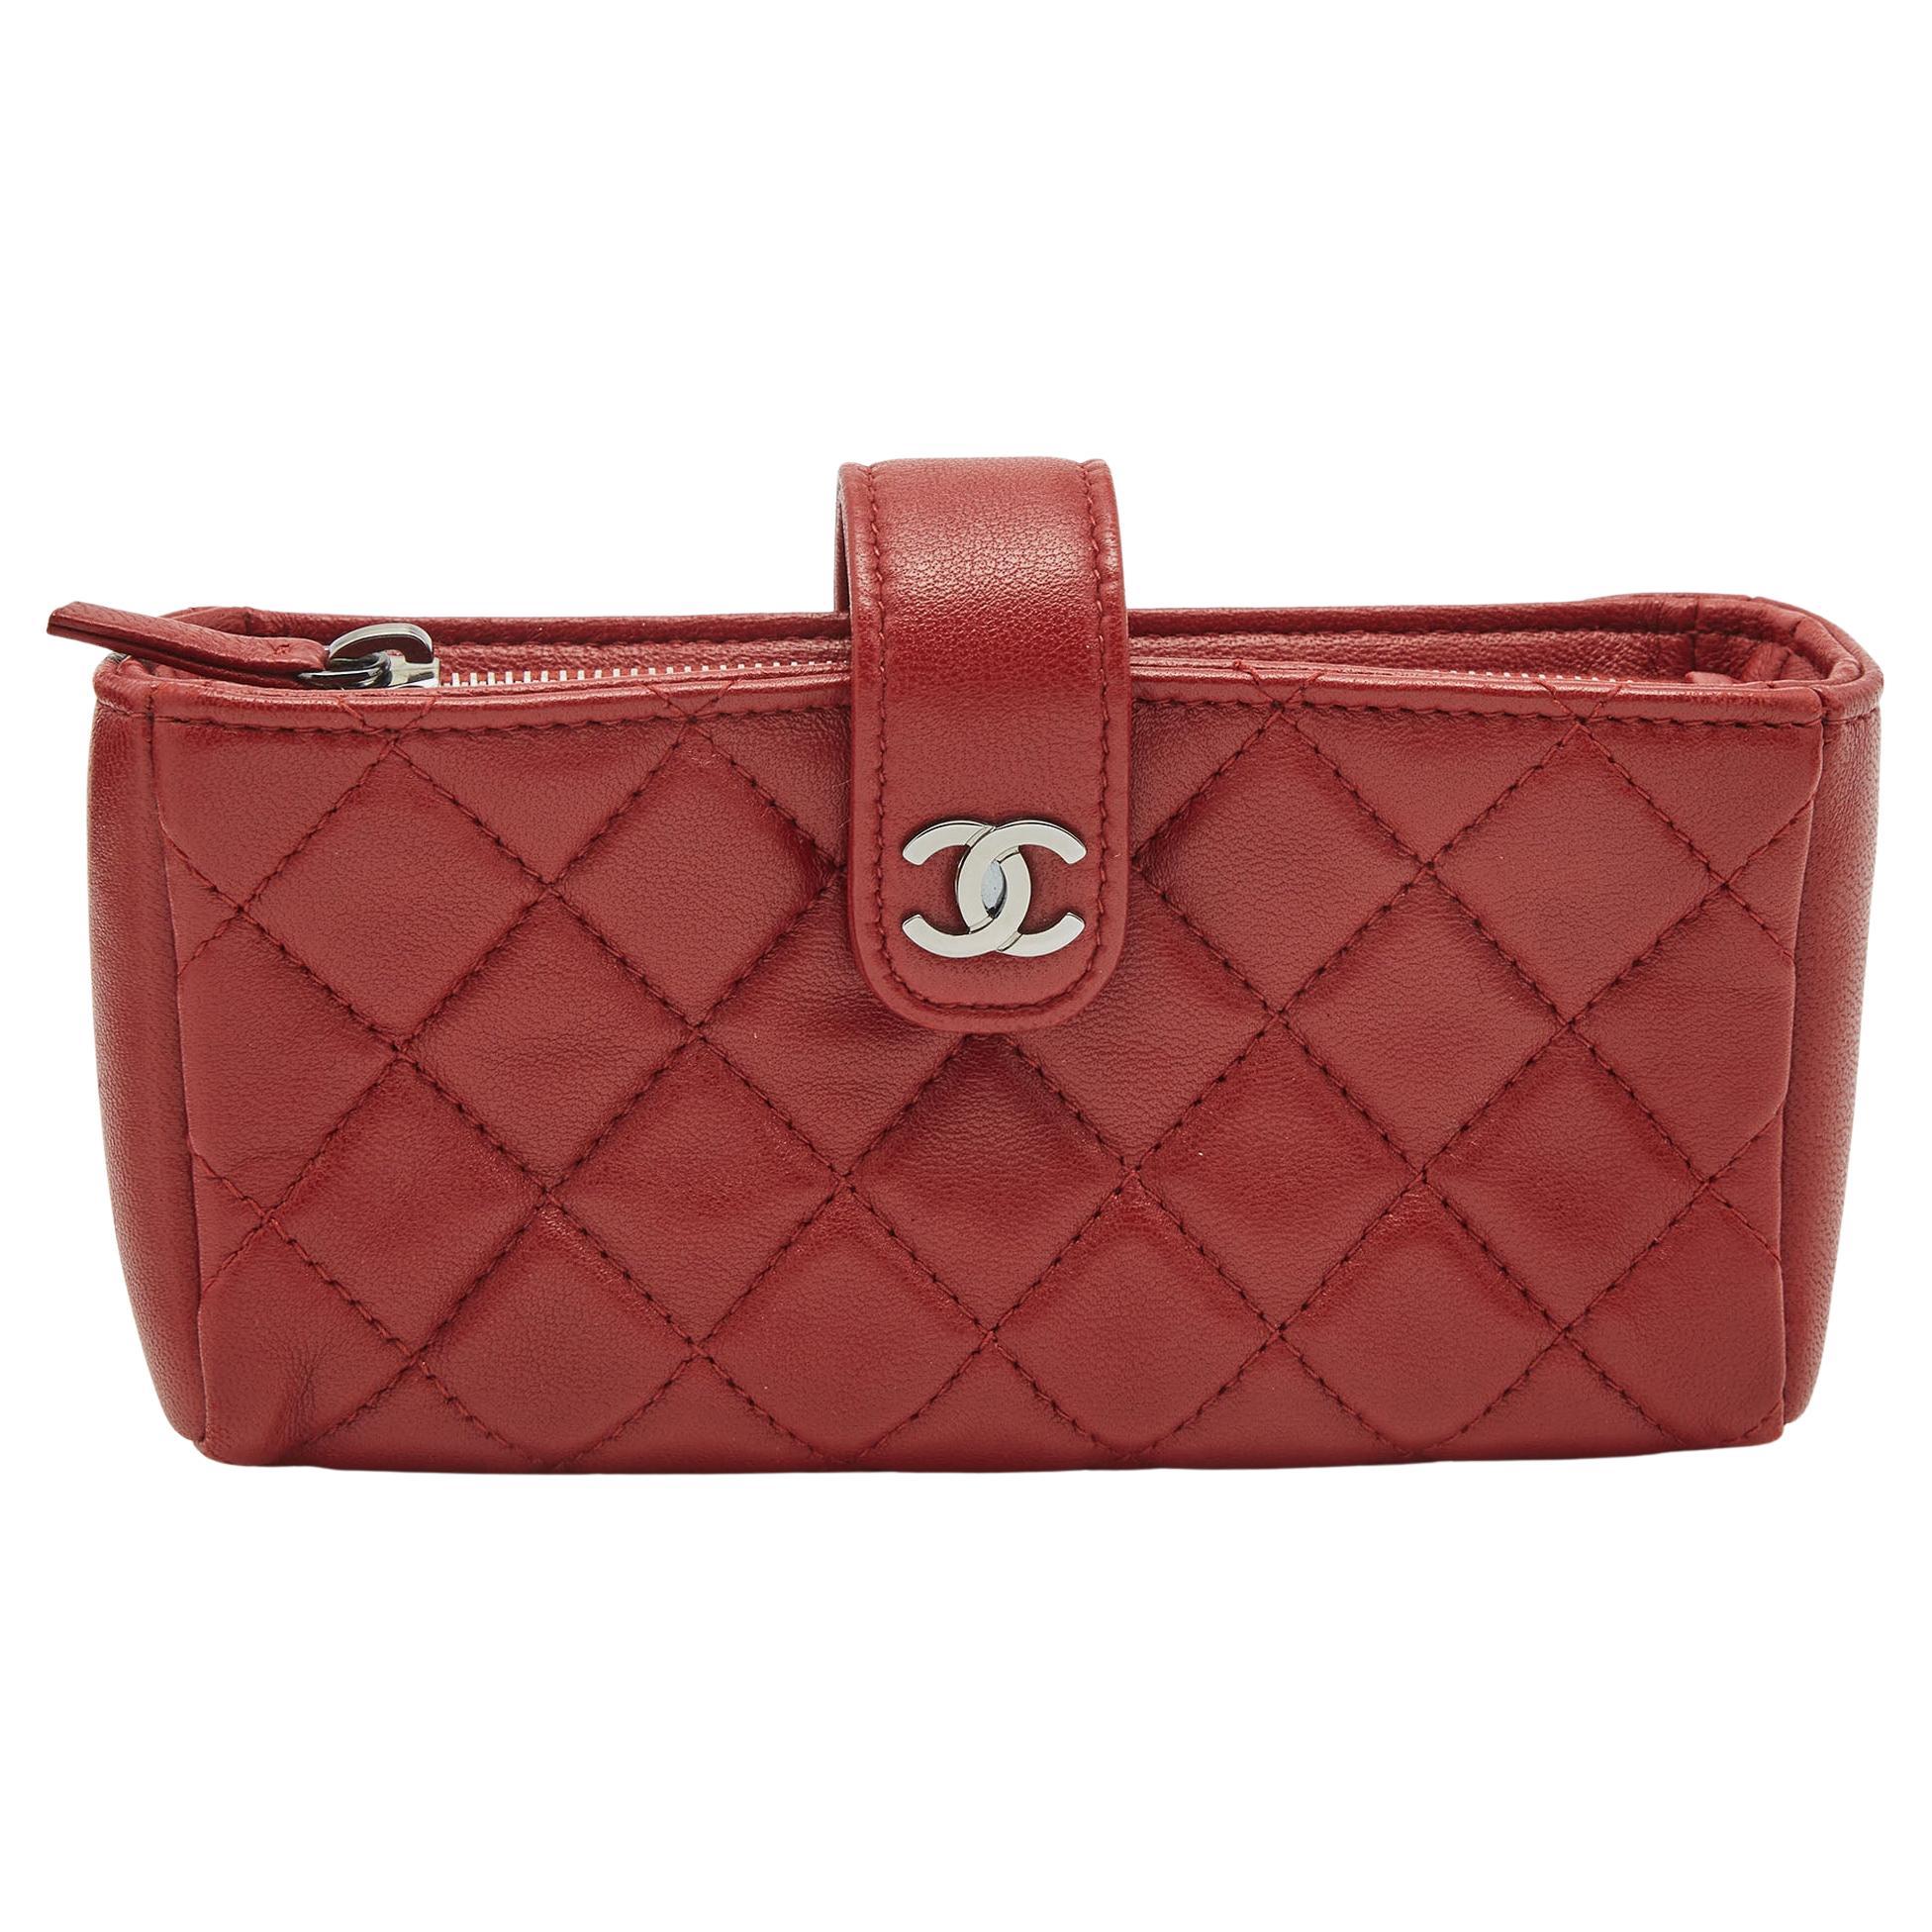 Chanel Phone Pouch - 5 For Sale on 1stDibs